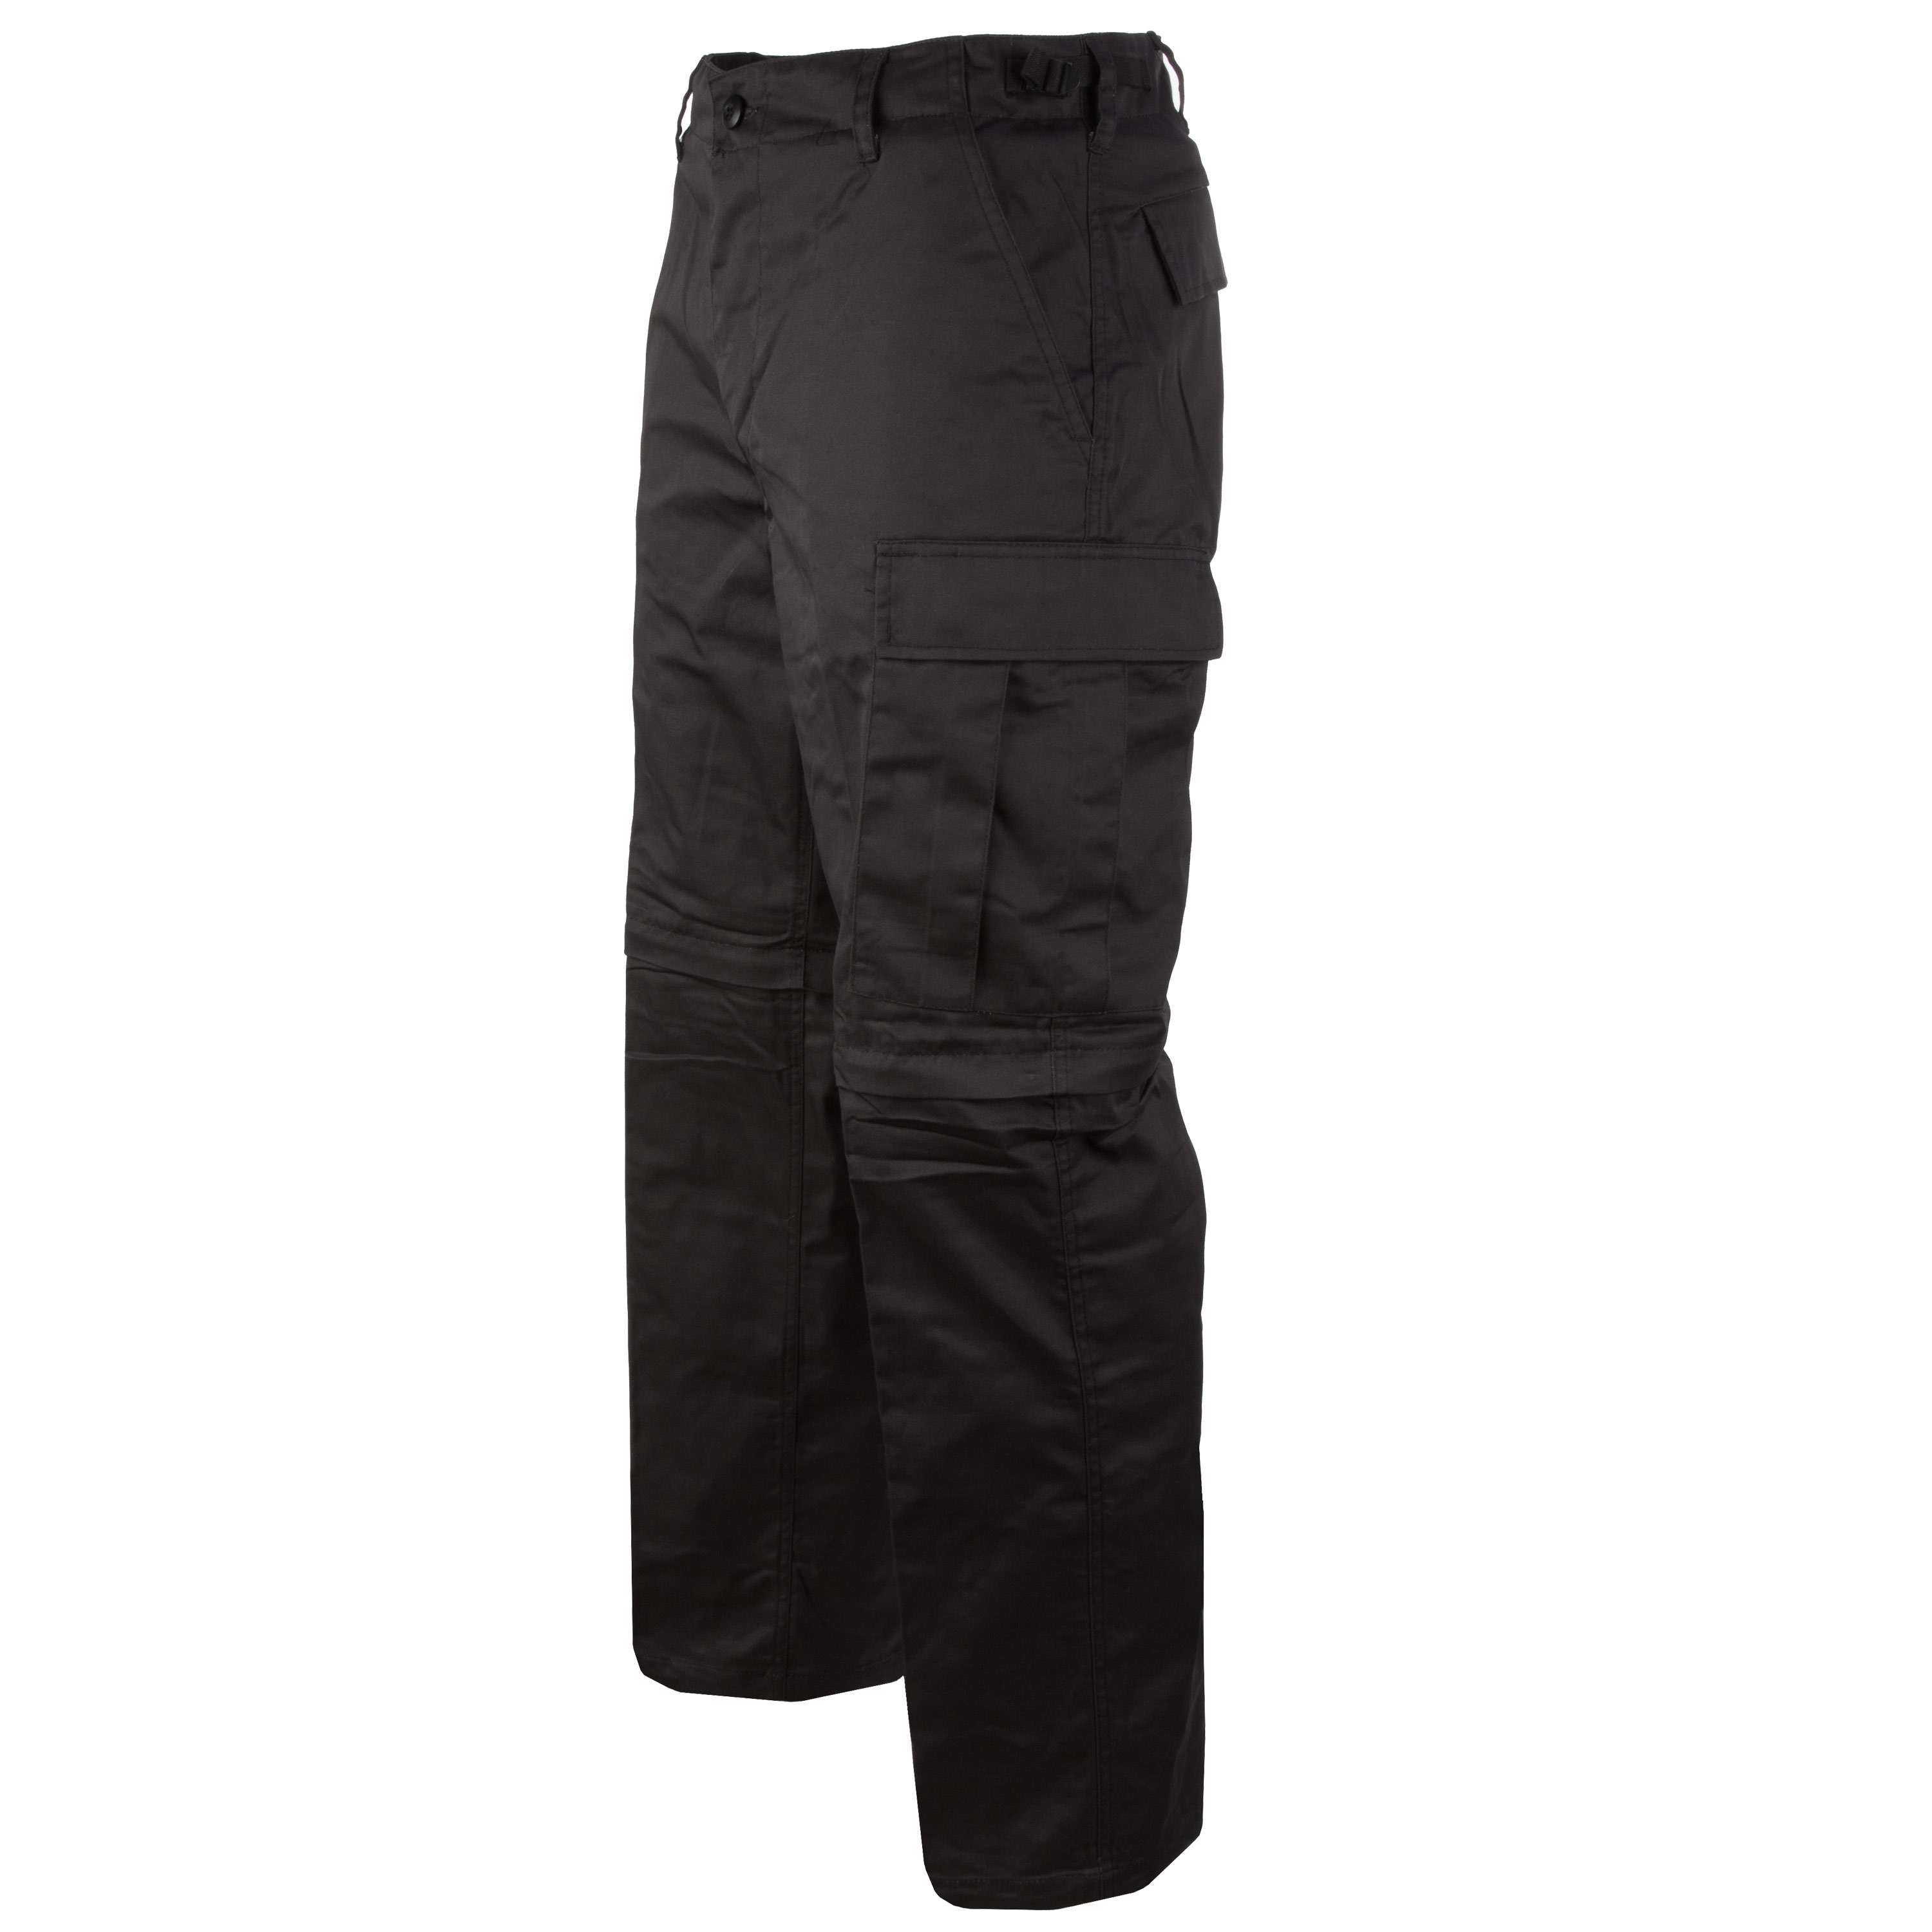 Purchase the Zip-off Pants black by ASMC